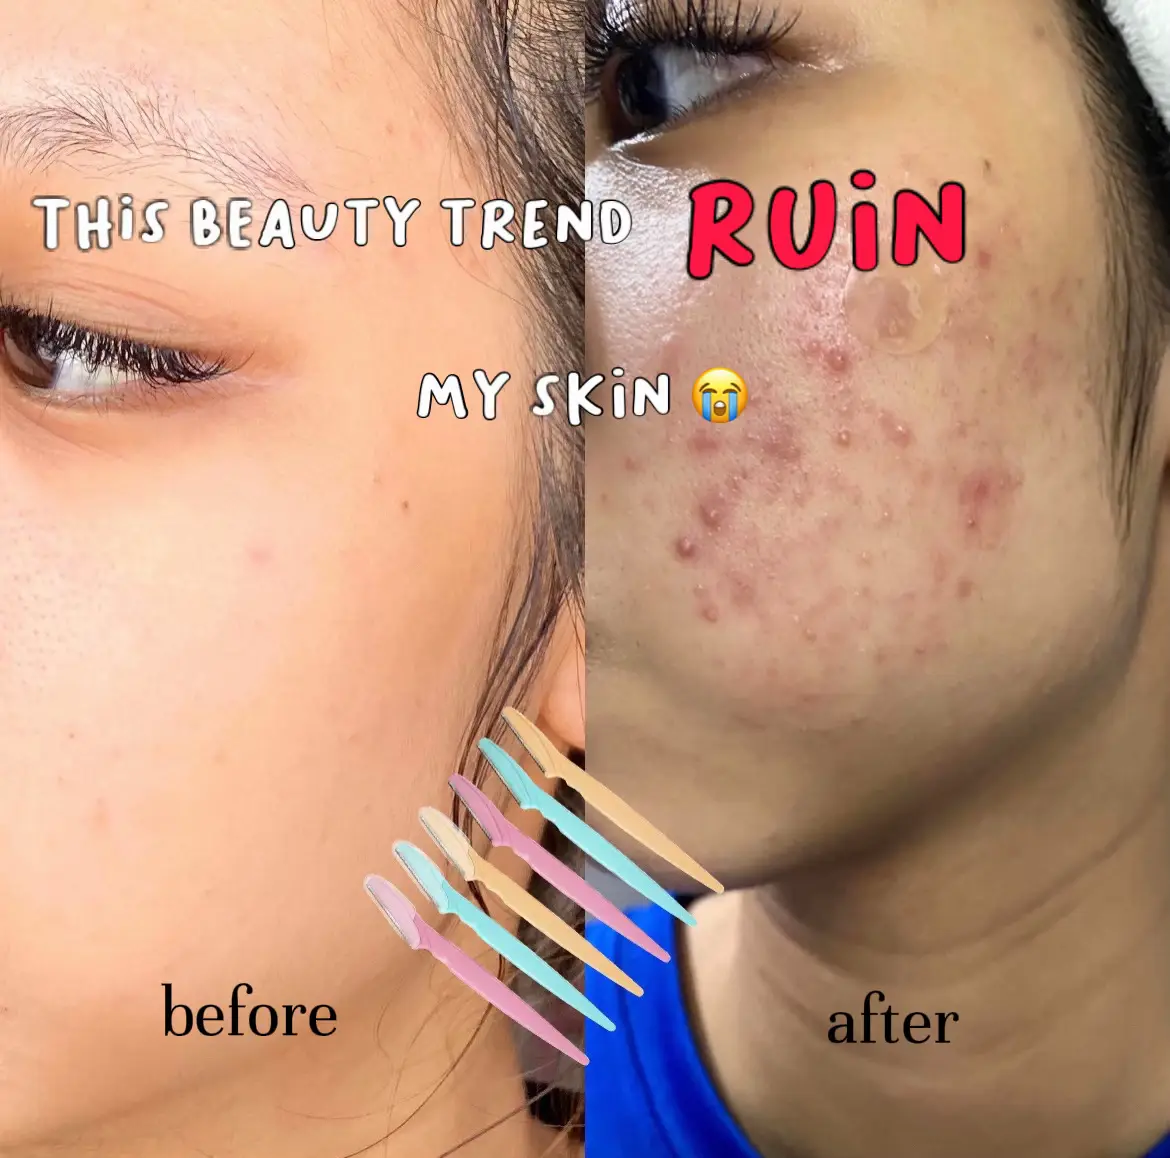 THIS BEAUTY TREND RUINED MY SKIN 😭's images(0)